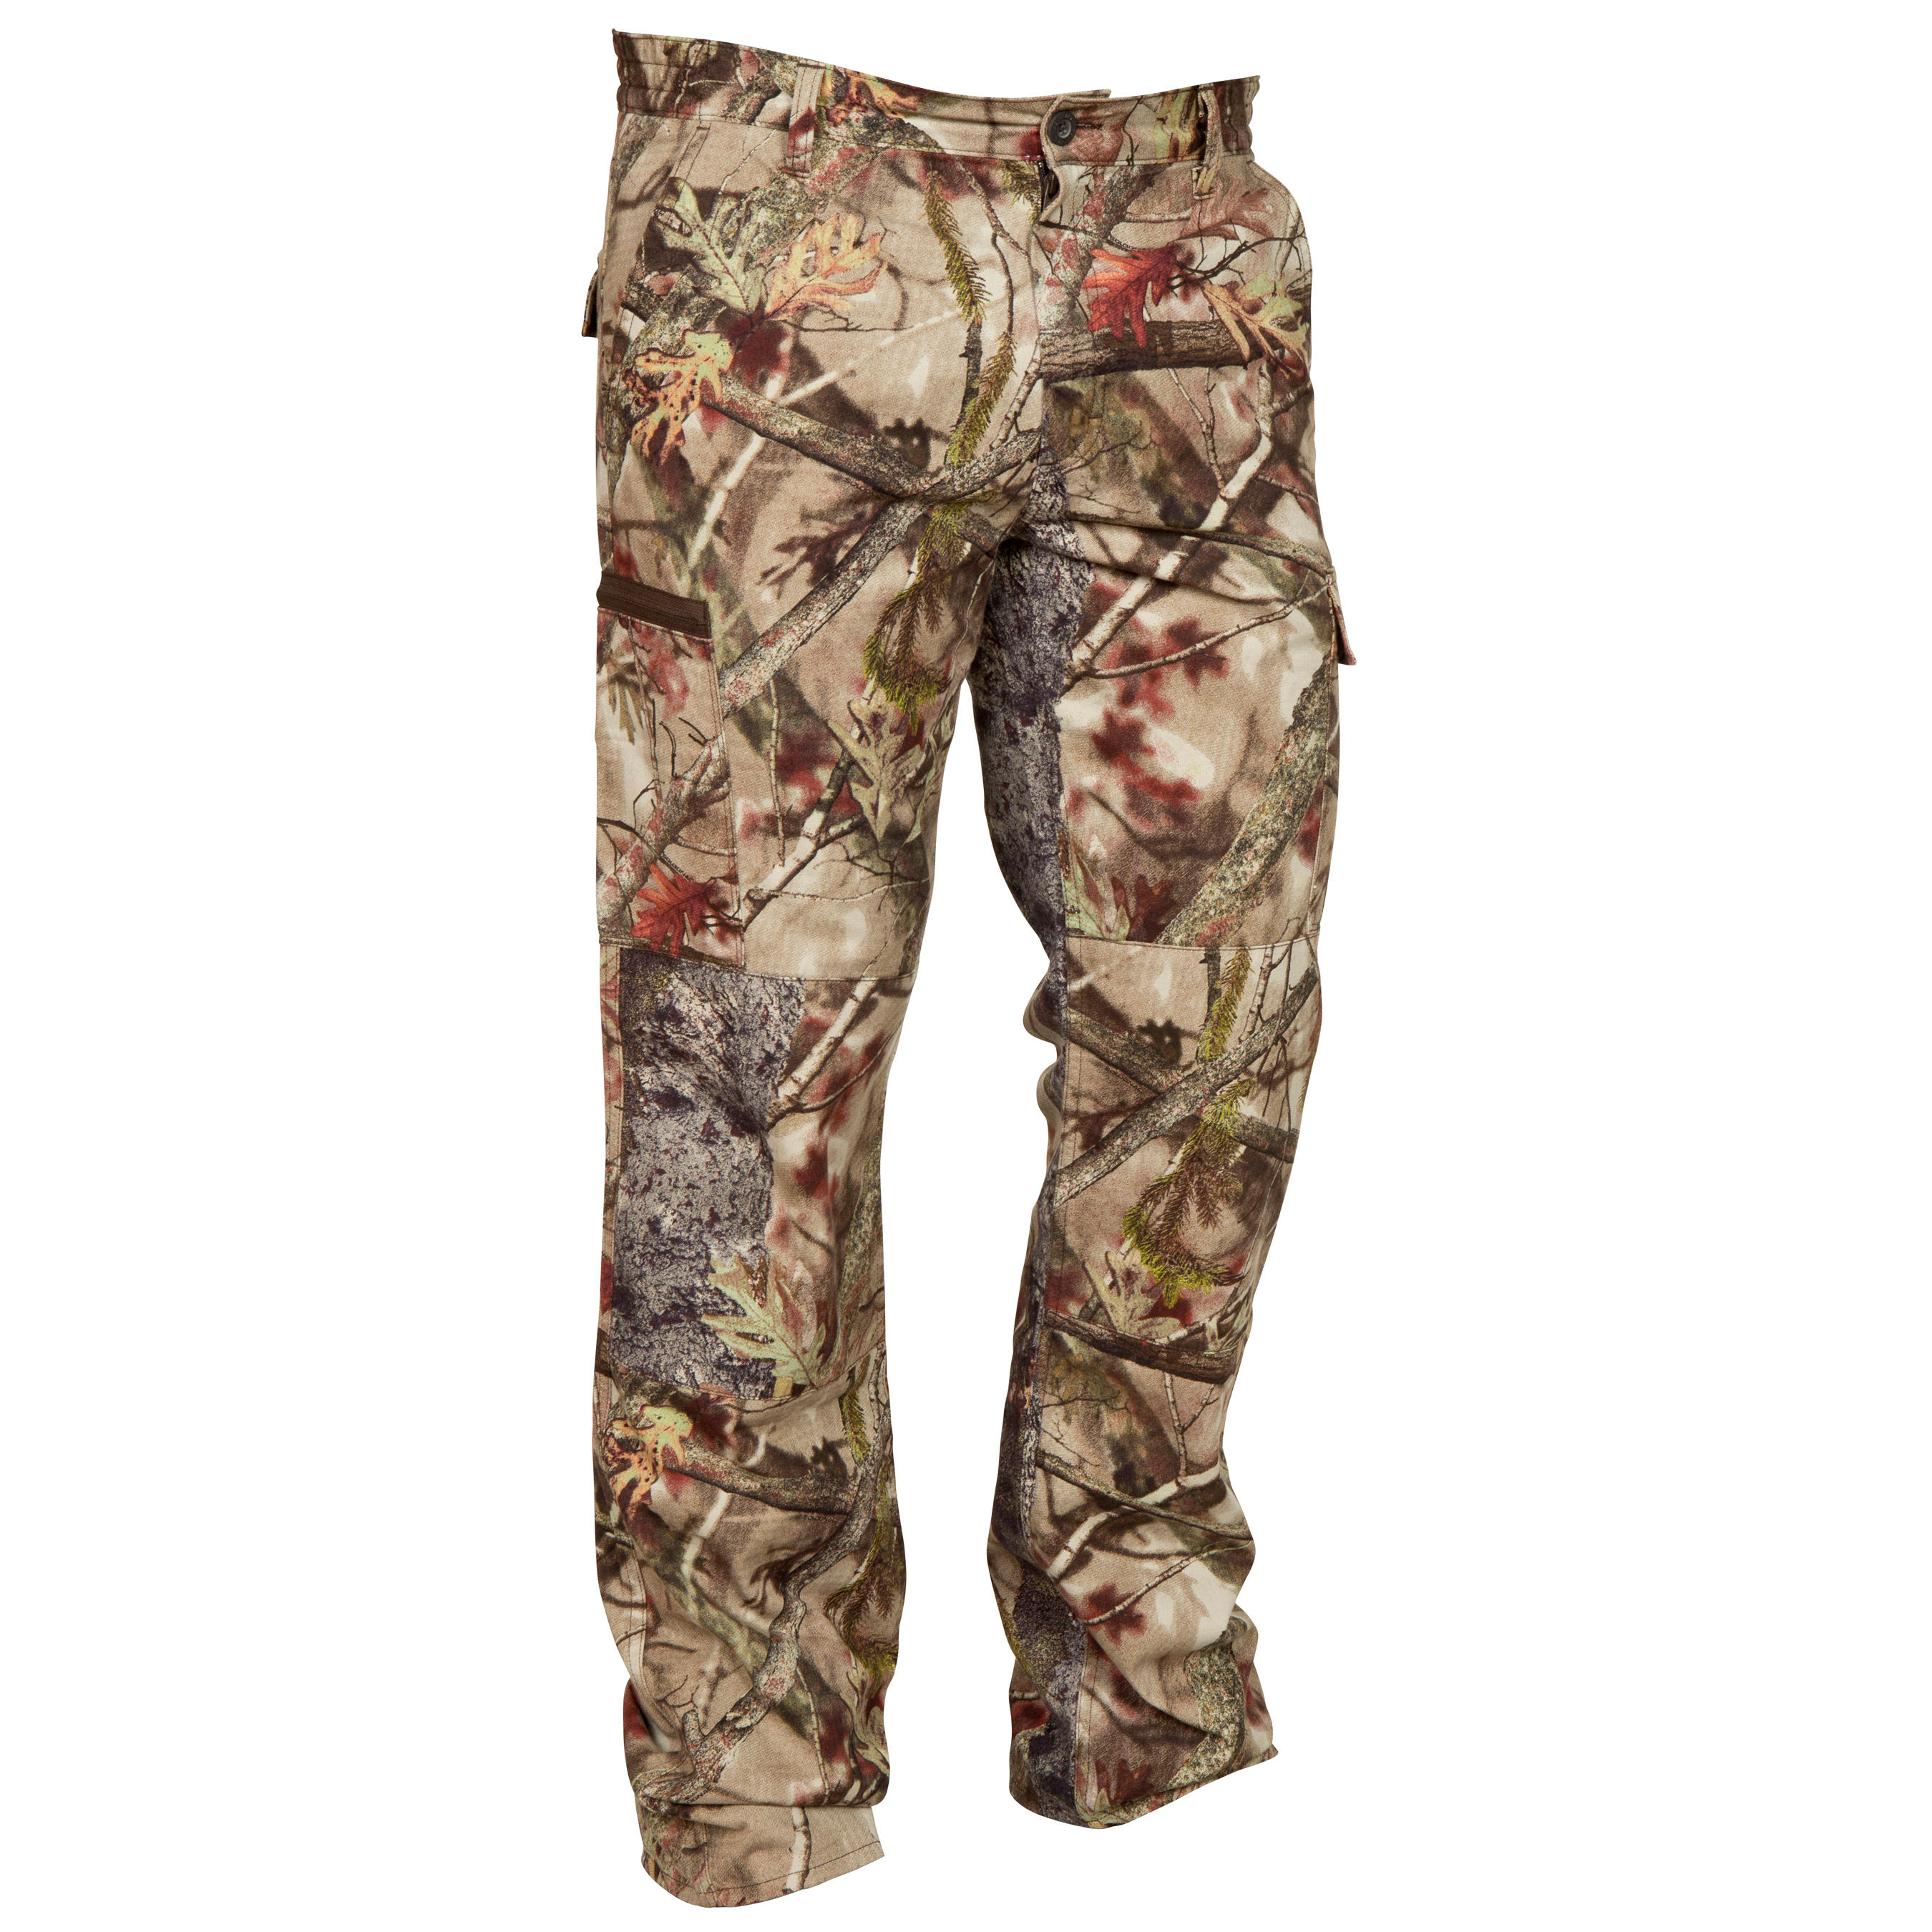 SOLOGNAC Breathable Trousers - Woodland Camo